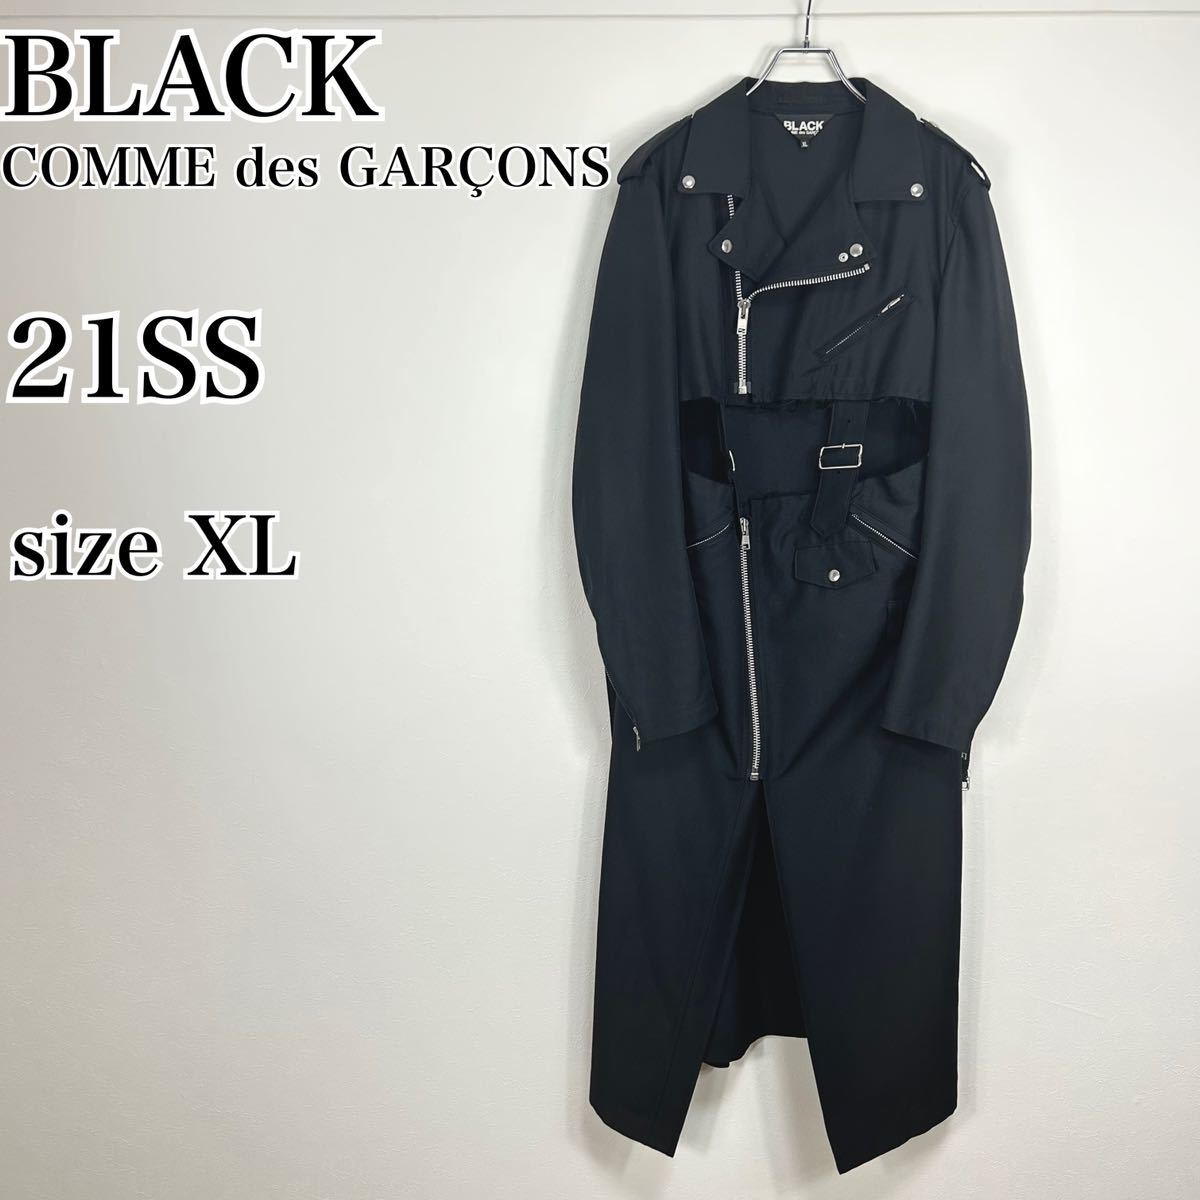 BLACK COMME des GARCONS 21SS ダブルライダースコート-